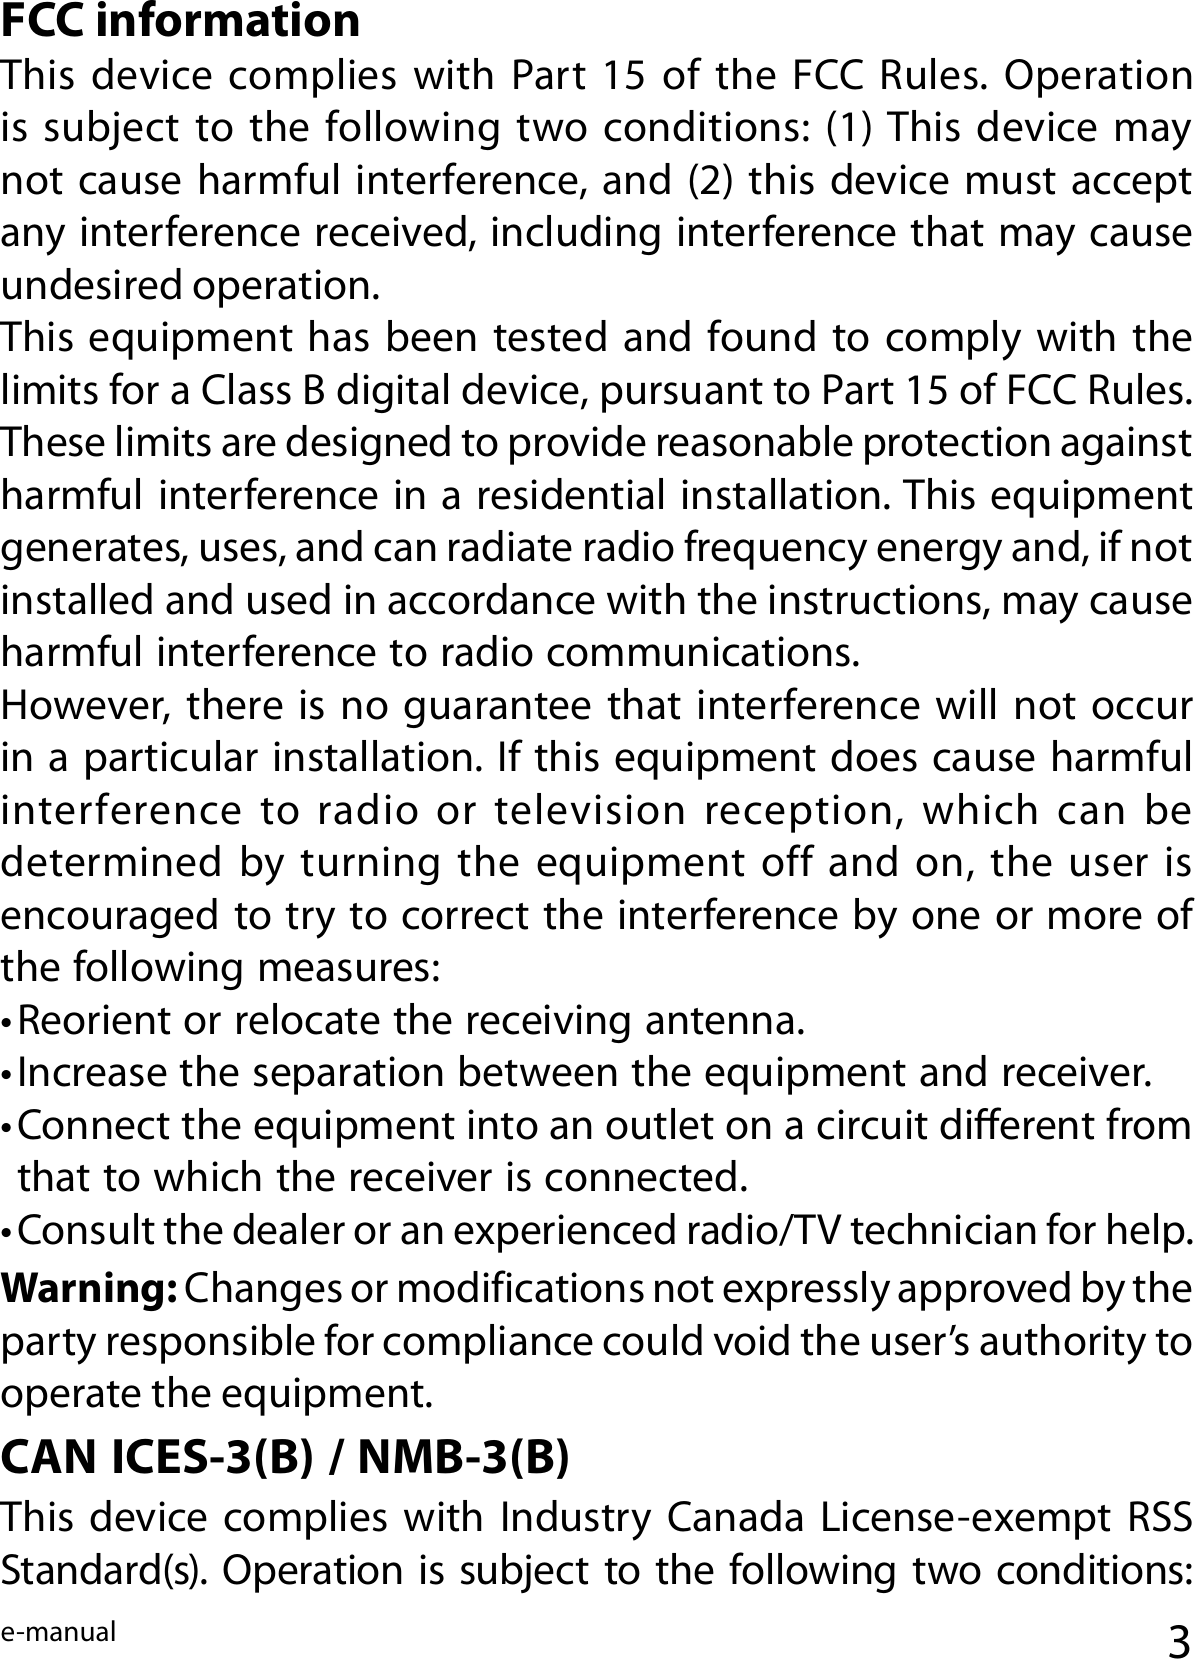 e-manualFCC informationThis device complies with  Part  15  of the  FCC  Rules. Operation is  subject  to  the  following two conditions:  (1) This device may not cause harmful interference, and (2) this device must accept any interference received, including interference that may cause undesired operation.This equipment has  been  tested and  found to comply with the limits for a Class B digital device, pursuant to Part 15 of FCC Rules. These limits are designed to provide reasonable protection against harmful interference in a residential installation. This equipment generates, uses, and can radiate radio frequency energy and, if not installed and used in accordance with the instructions, may cause harmful interference to radio communications.However, there is  no  guarantee that interference will  not  occur in a particular installation. If this equipment does cause harmful interference to radio or television reception, which can be determined  by  turning  the  equipment  off  and  on,  the  user  is encouraged to try to correct the interference by one or more of the following measures:• Reorient or relocate the receiving antenna.• Increase the separation between the equipment and receiver.• Connect the equipment into an outlet on a circuit dierent from that to which the receiver is connected.• Consult the dealer or an experienced radio/TV technician for help.Warning: Changes or modifications not expressly approved by the party responsible for compliance could void the user’s authority to operate the equipment.CAN ICES-3(B) / NMB-3(B) This device complies with  Industry  Canada License-exempt  RSS Standard(s). Operation is subject to the following two conditions: 3